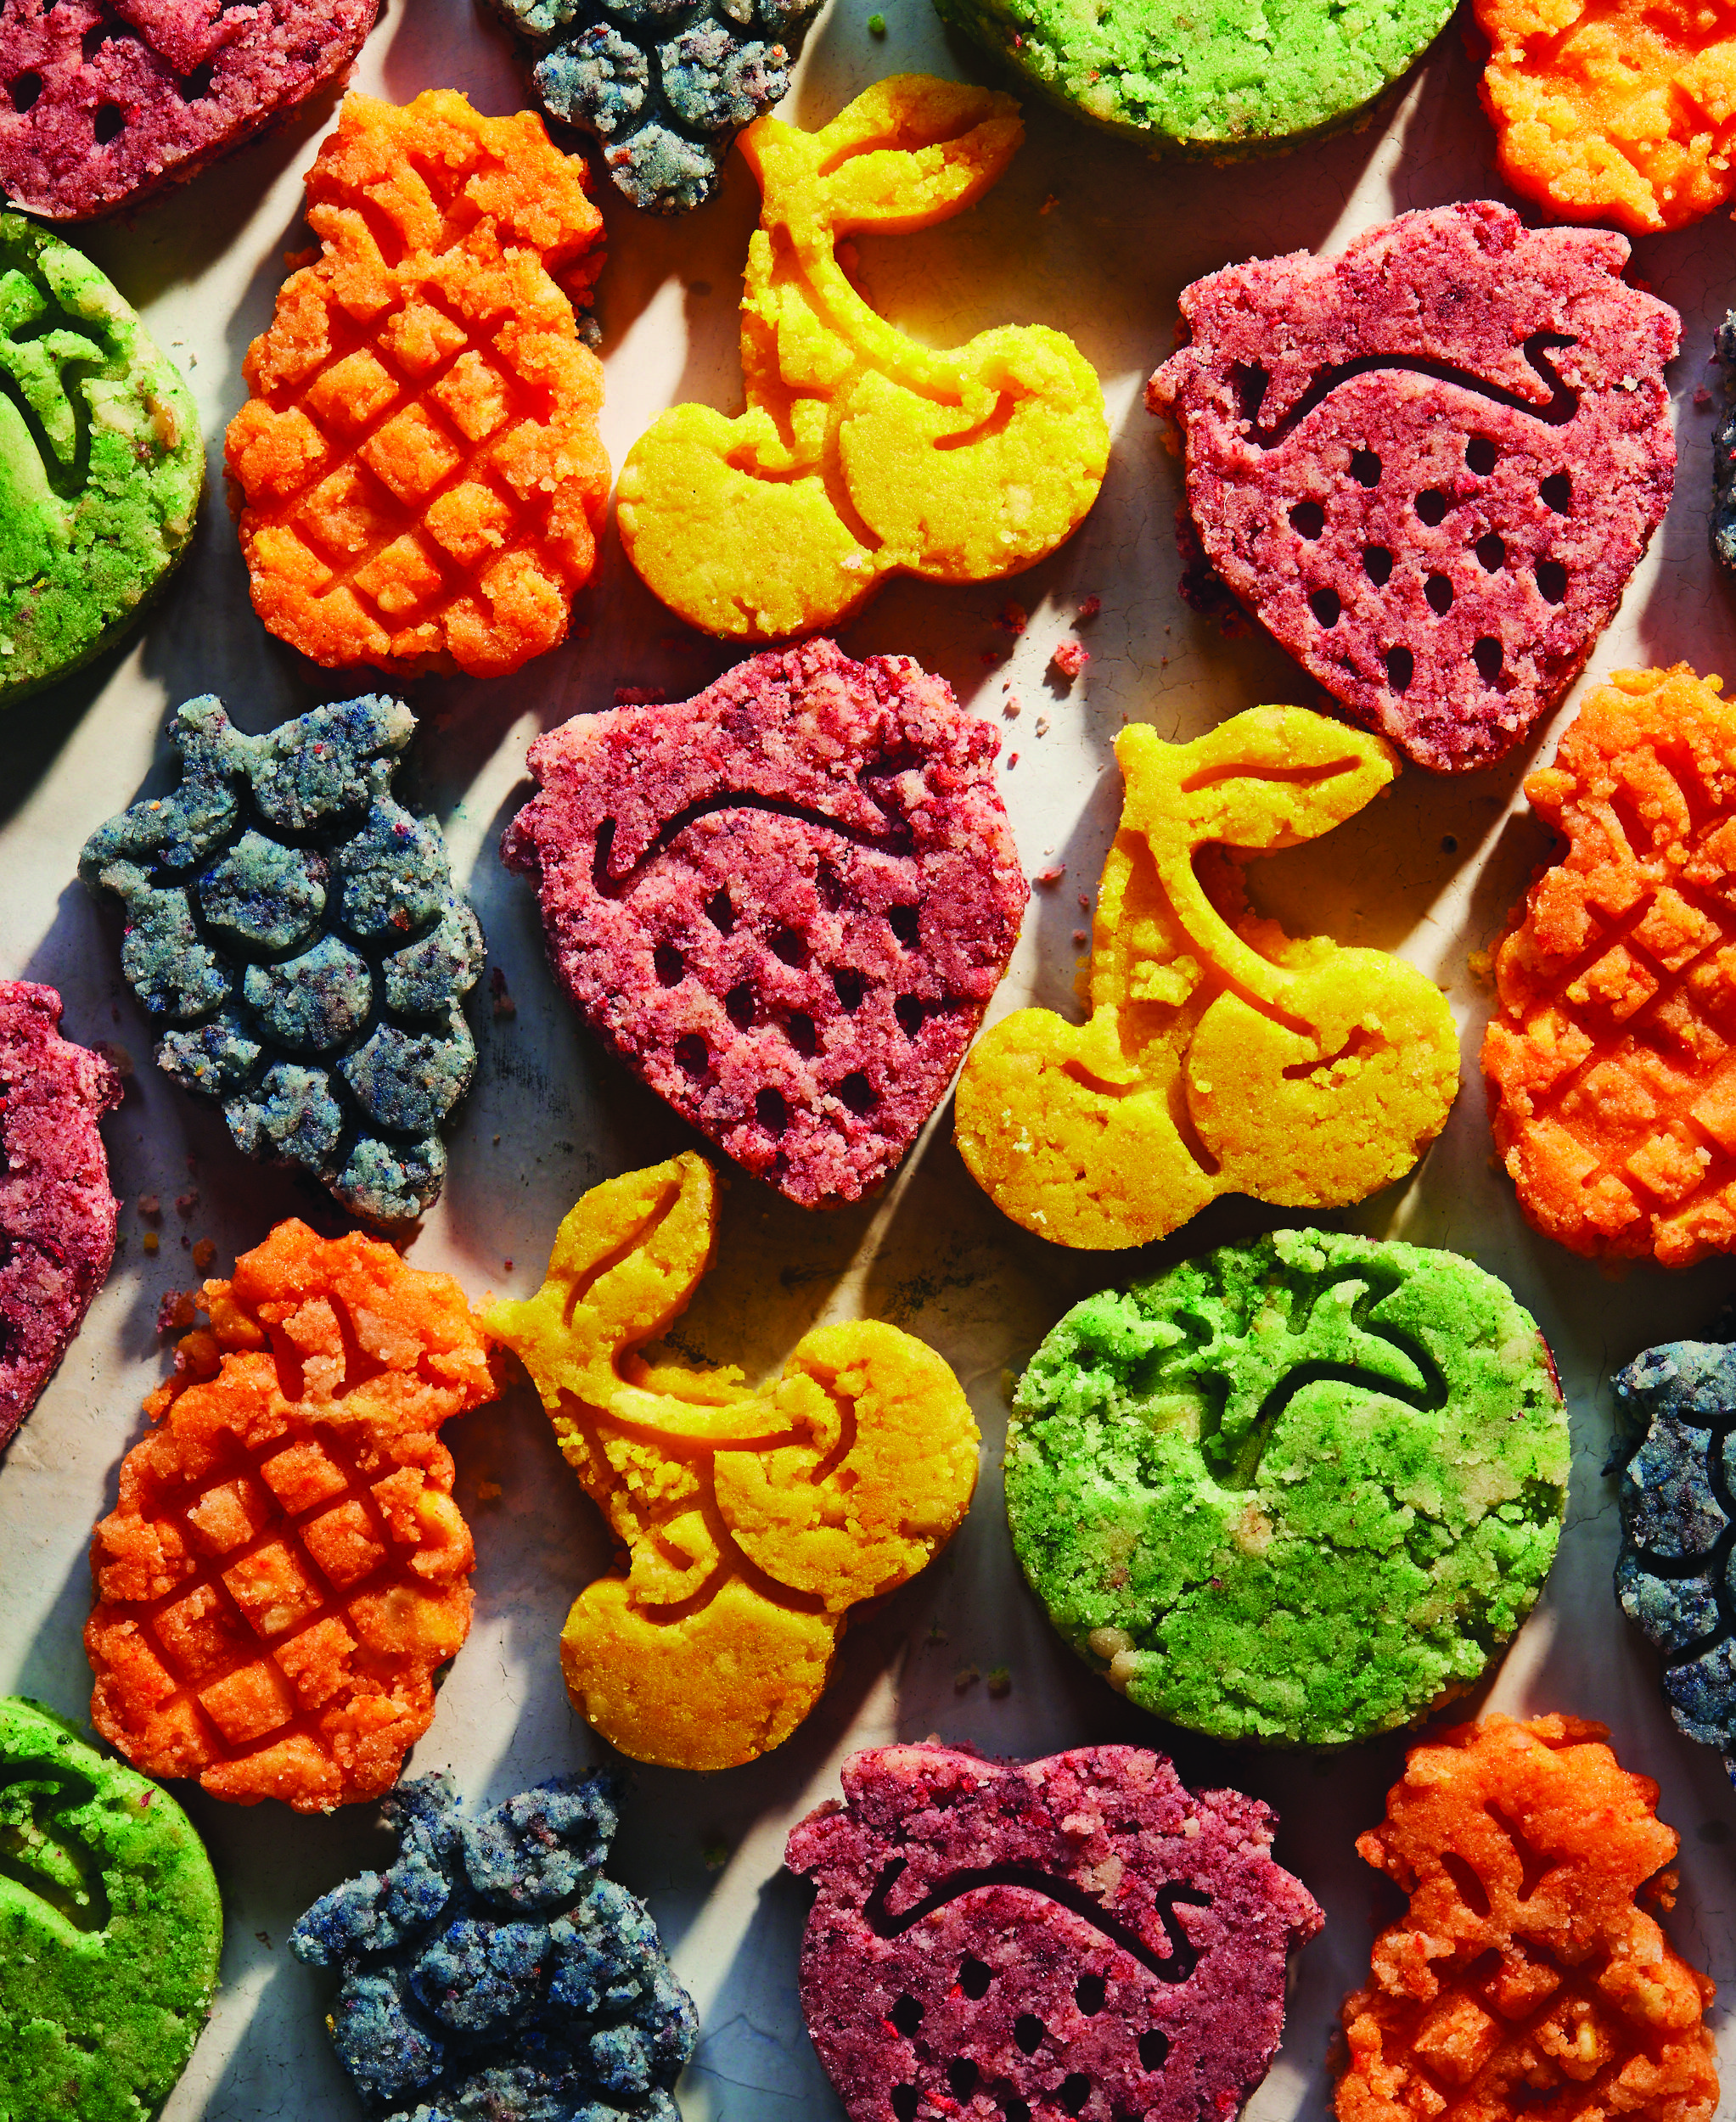 A colorful selection of rainbow polvoron. The cookies are shaped like cherries, pineapple, grapes, strawberries, and apples.